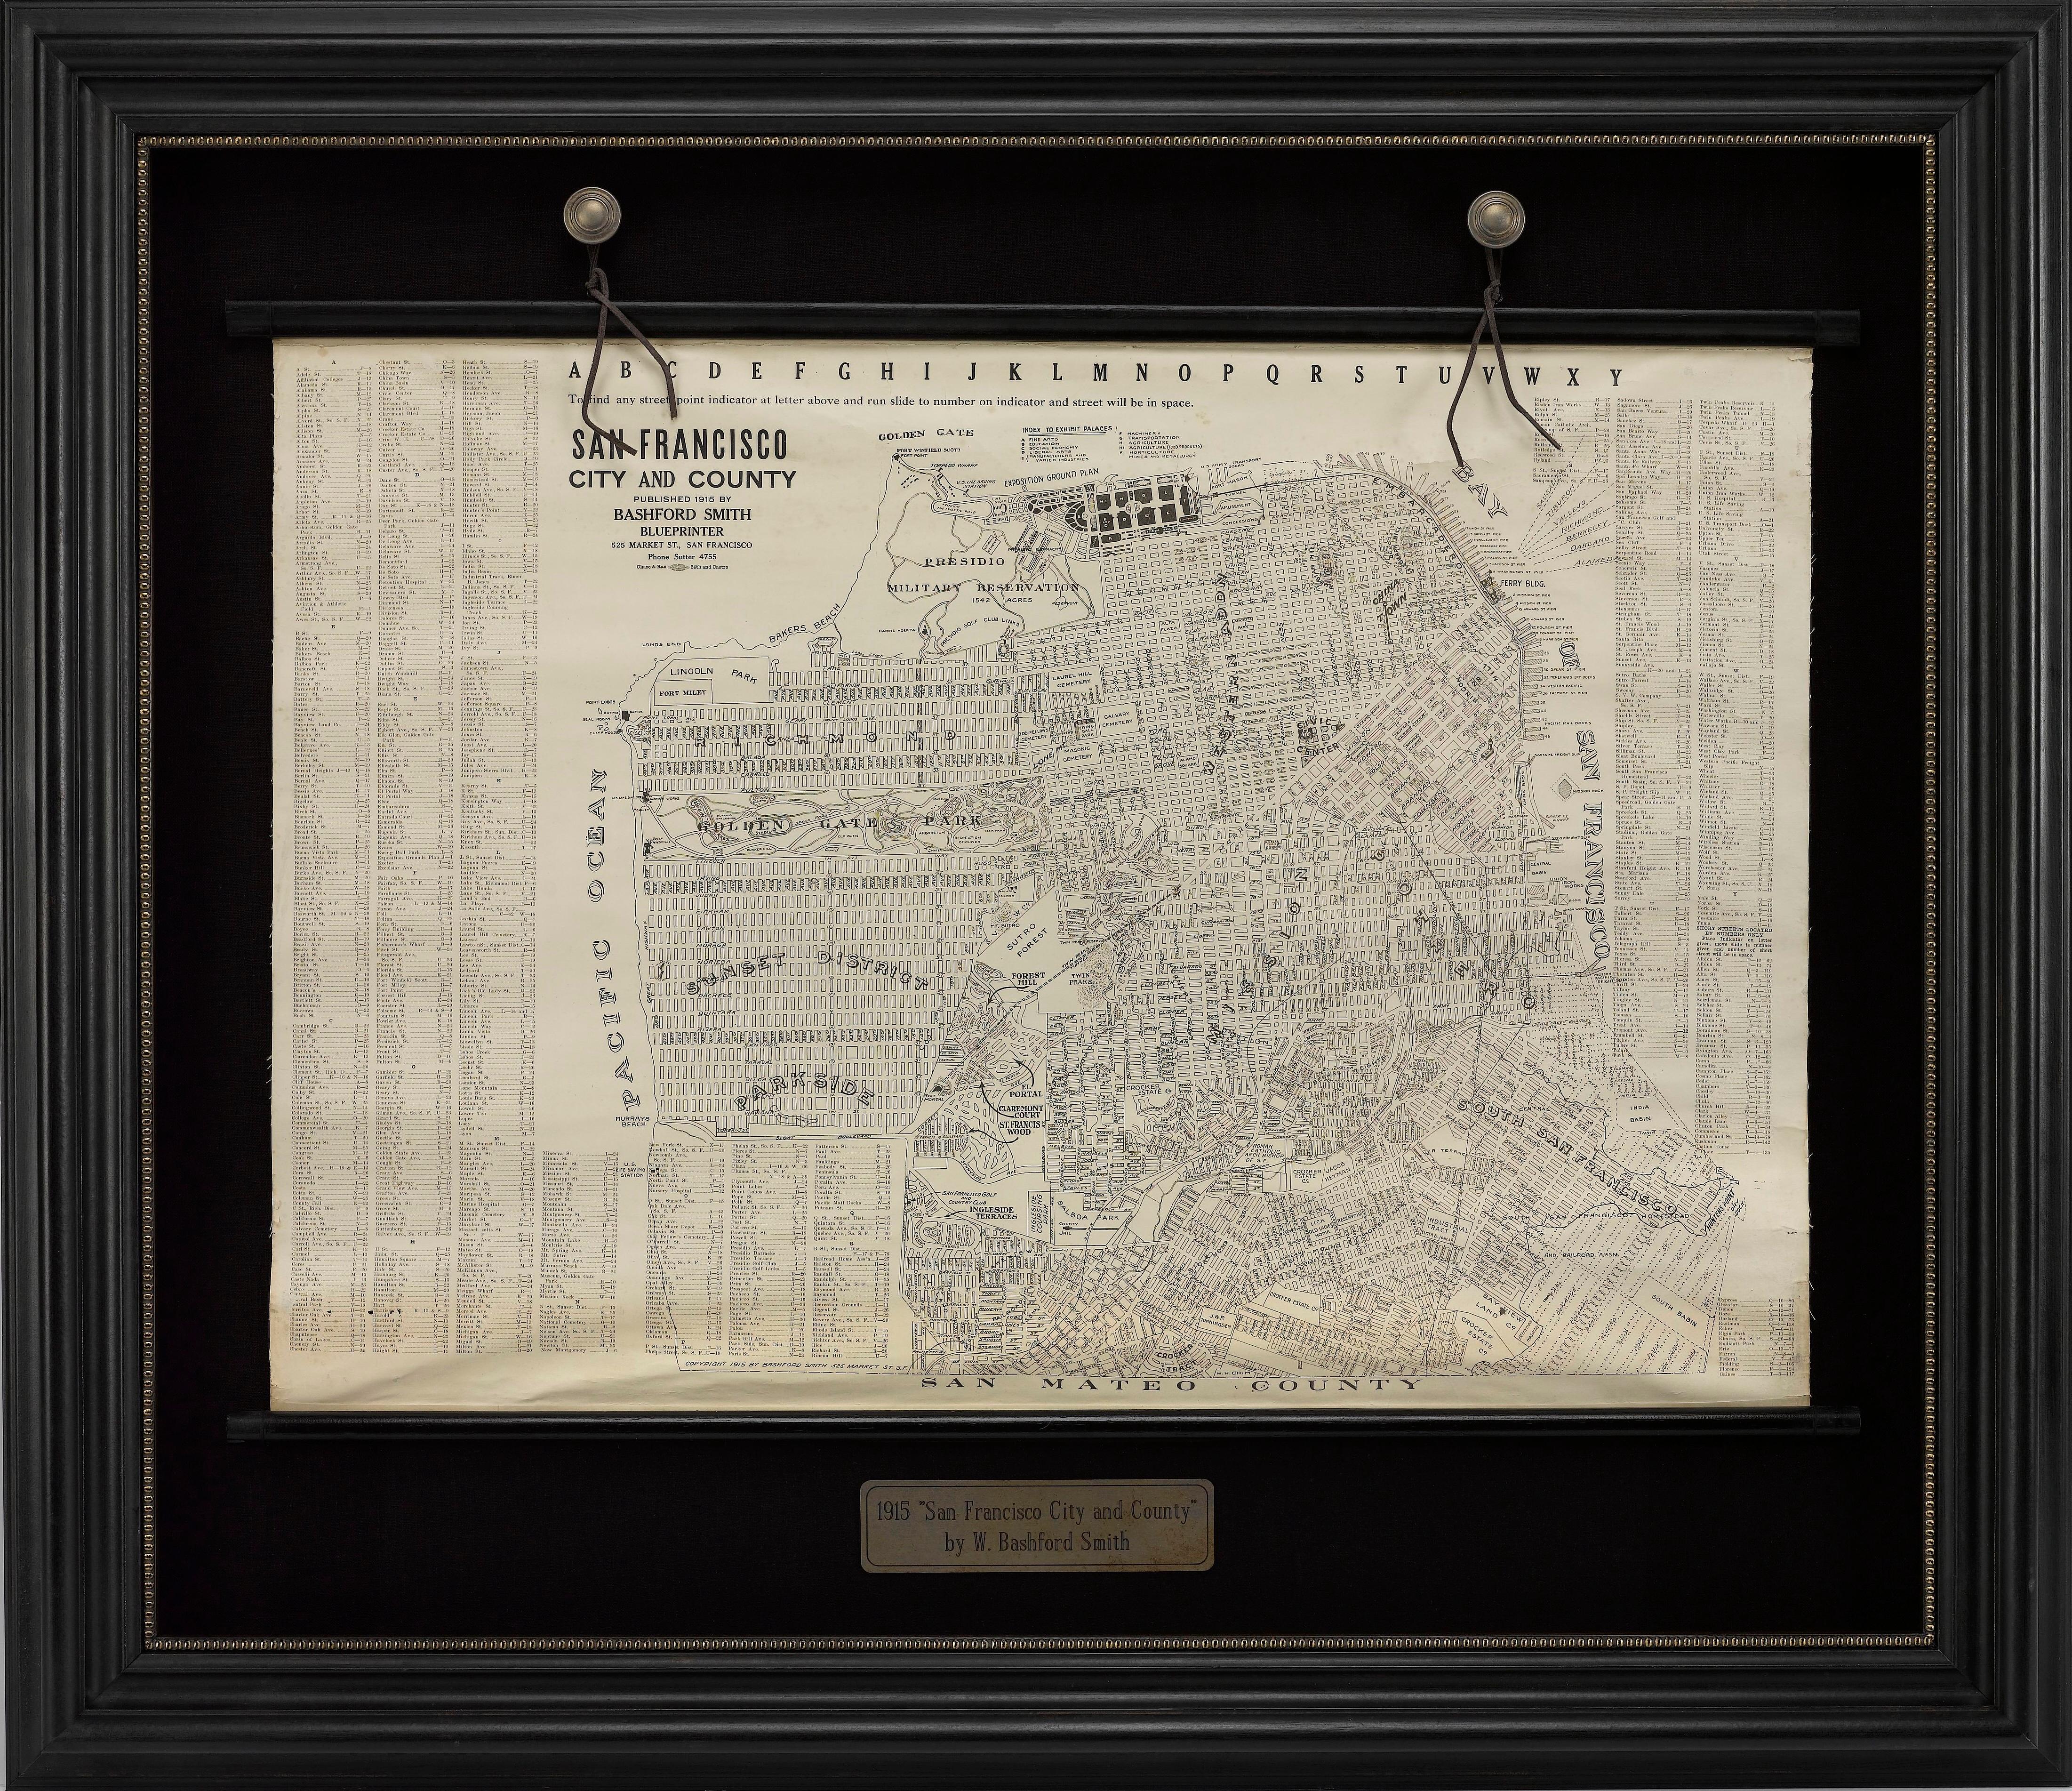 Presented is a rare wall map of San Francisco by W. Bashford Smith. Published in San Francisco in 1915, this map indicates streets and city districts, and, most notably, shows the site of the Panama-Pacific International Exposition, with a smaller